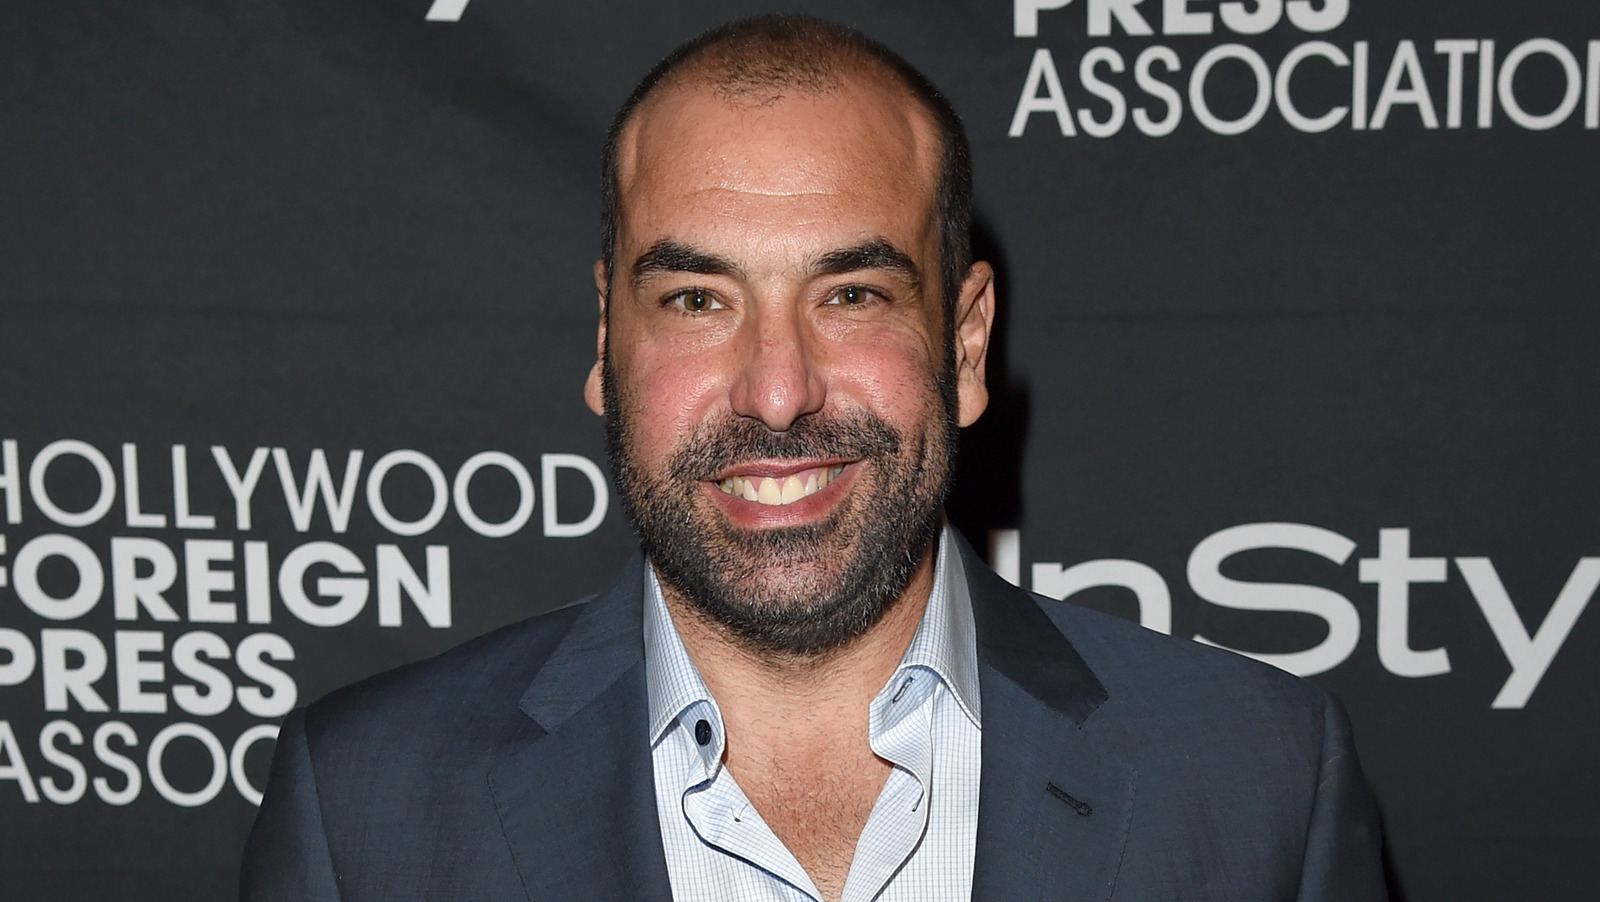 Whatever Happened To Suits Star Rick Hoffman?